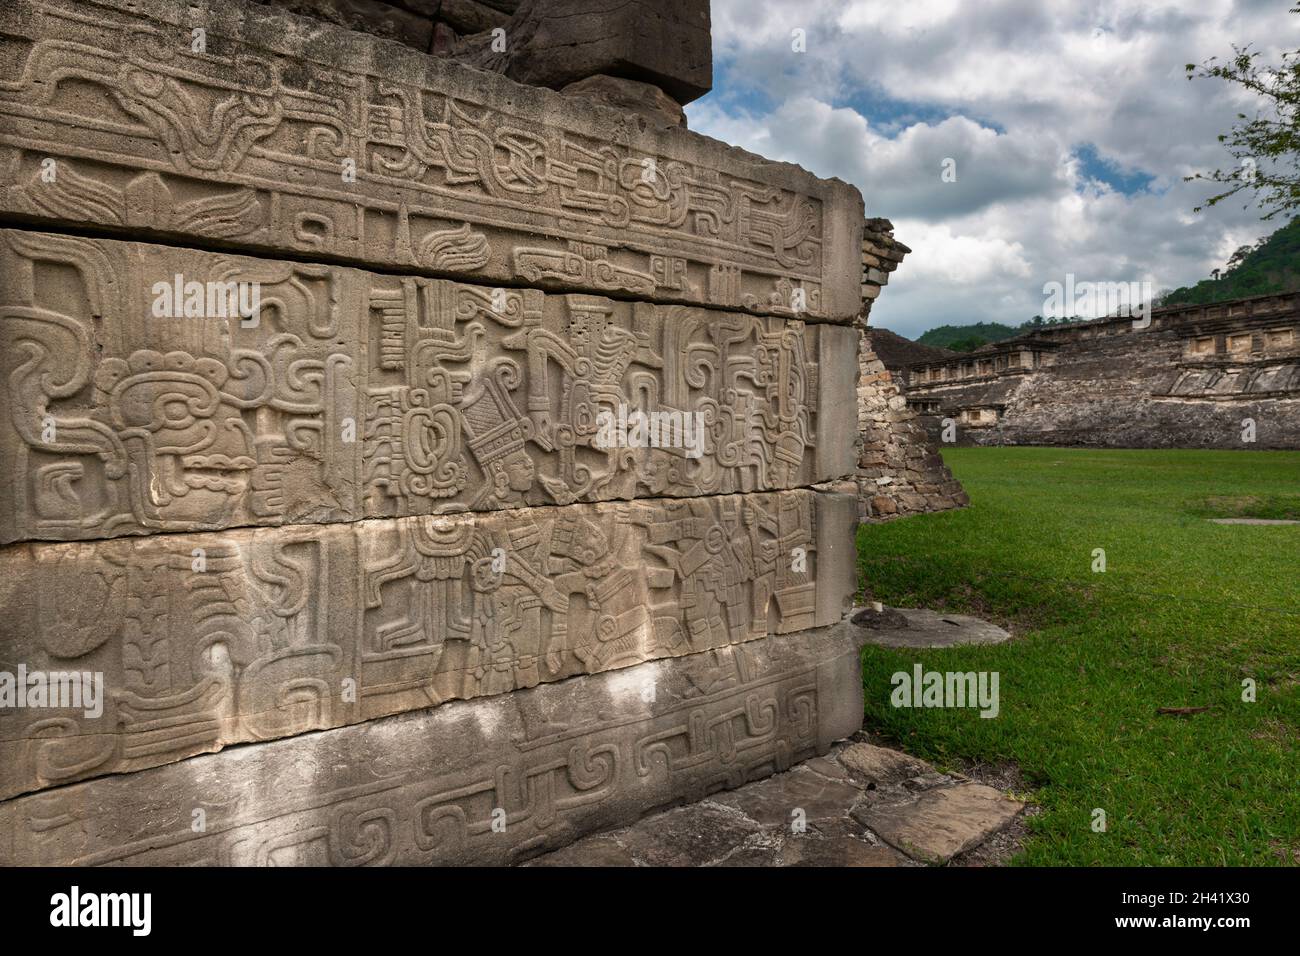 Detail of a bas-relief carving in a pyramid at the EL Tajin archeological site, in Papantla, Veracruz, Mexico. Stock Photo